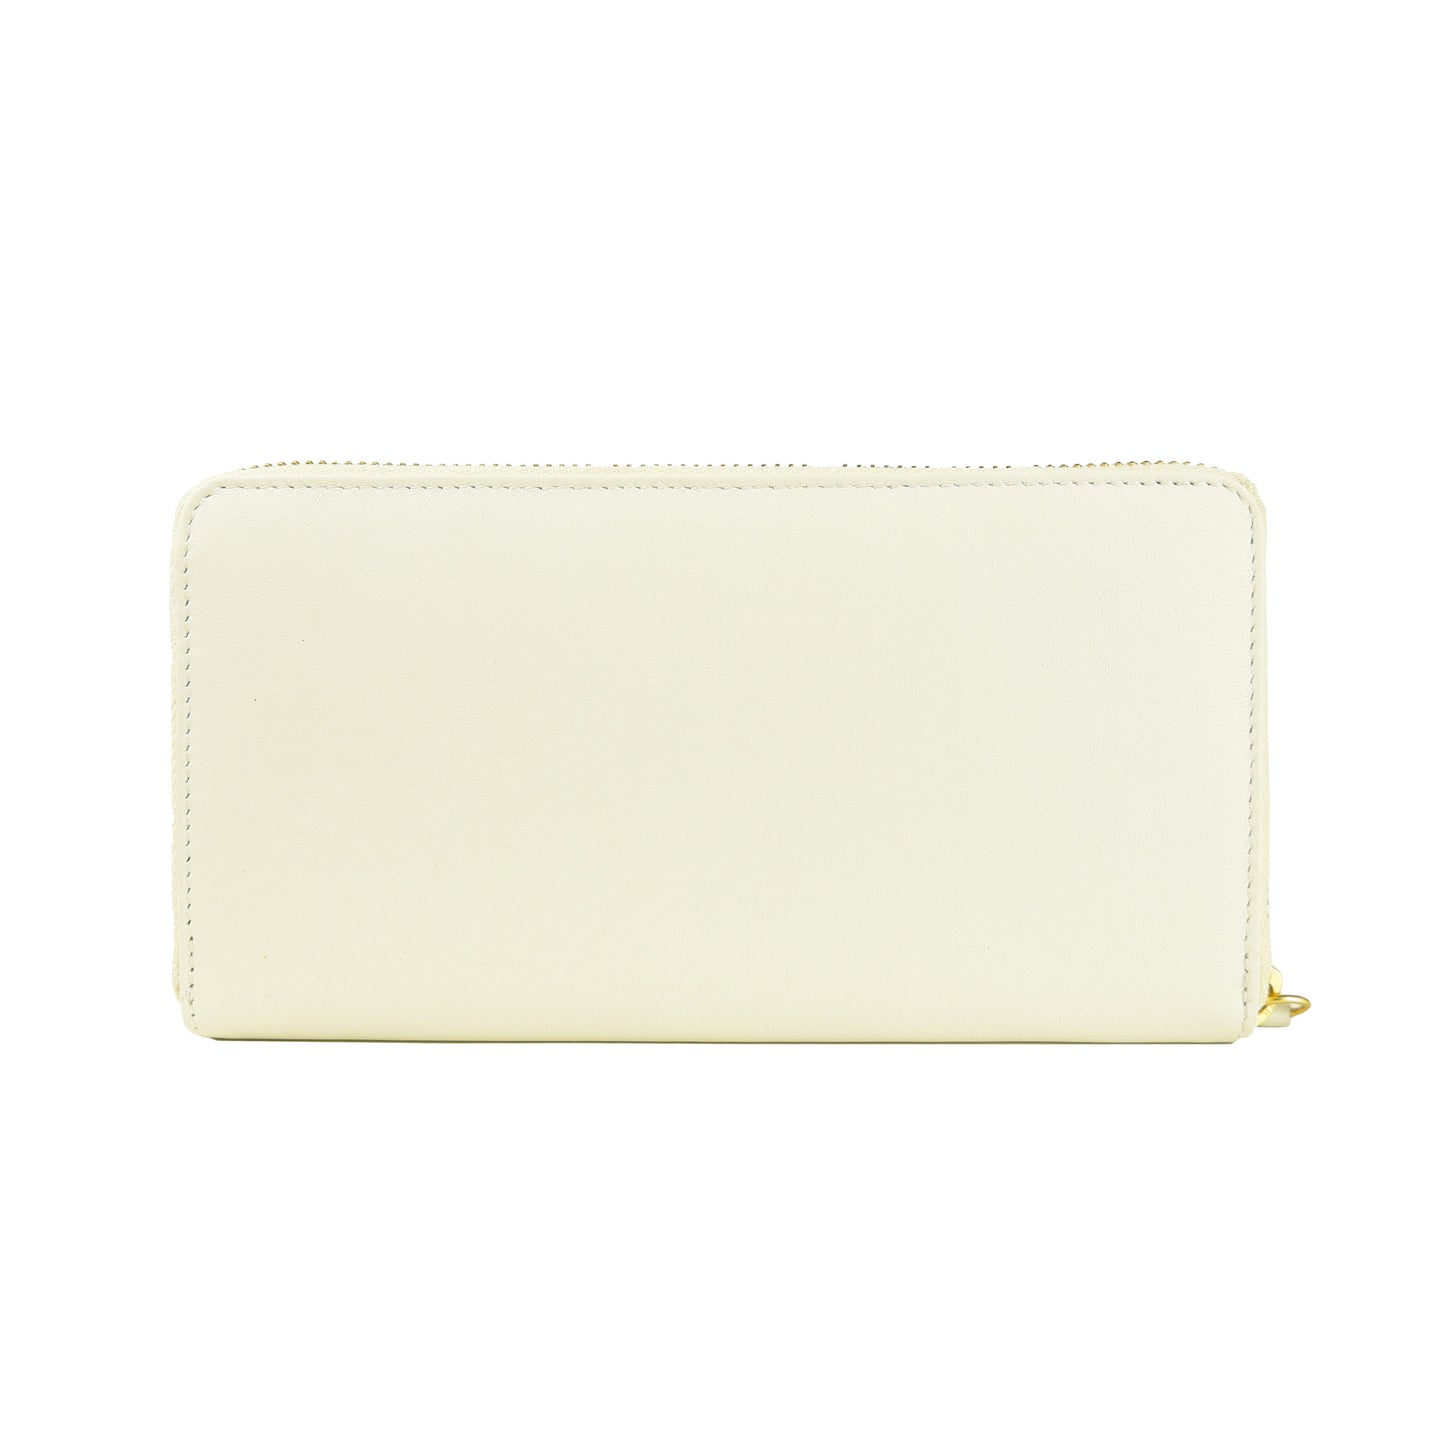 White Calf Leather Wallet